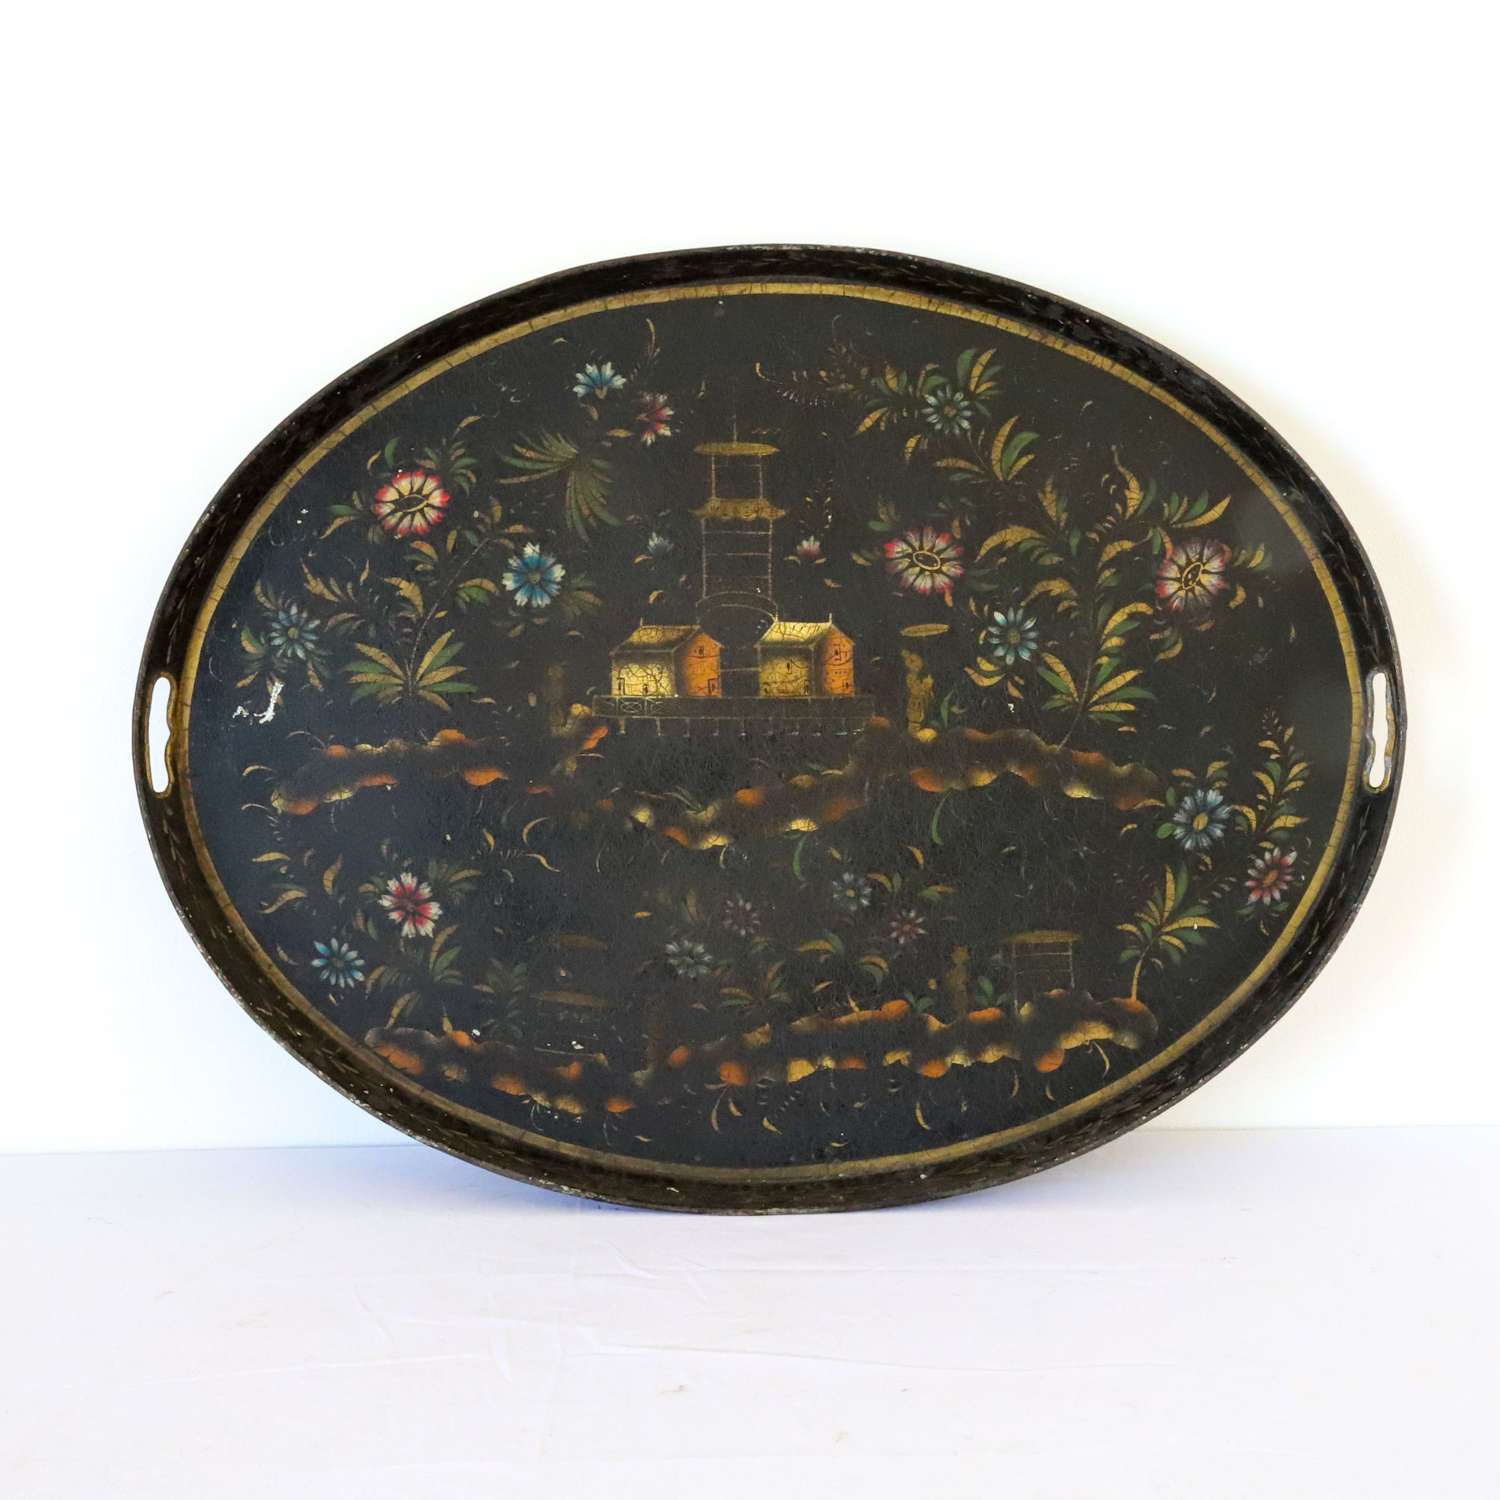 Swedish c. 1900 antique chinoiserie decorated oval tray